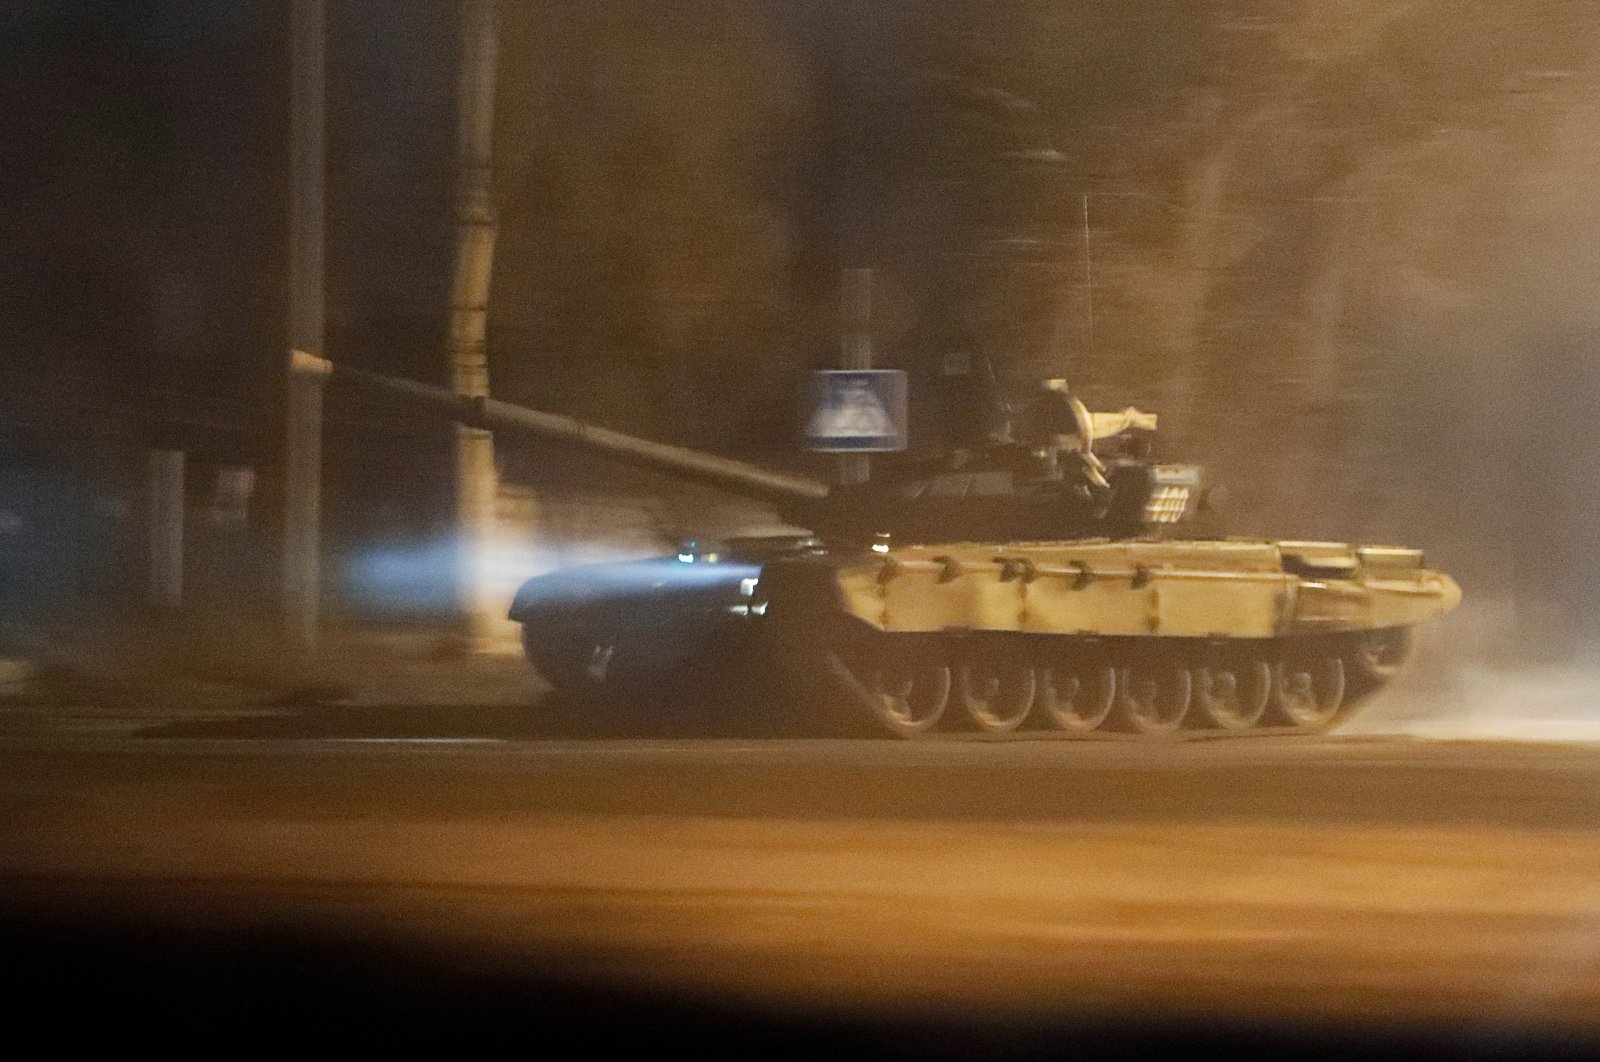 A tank drives along a street after Russian President Vladimir Putin ordered the deployment of Russian troops to two breakaway regions in eastern Ukraine following the recognition of their independence, in the separatist-controlled city of Donetsk, Ukraineb Feb. 22, 2022. (Reuters Photo)